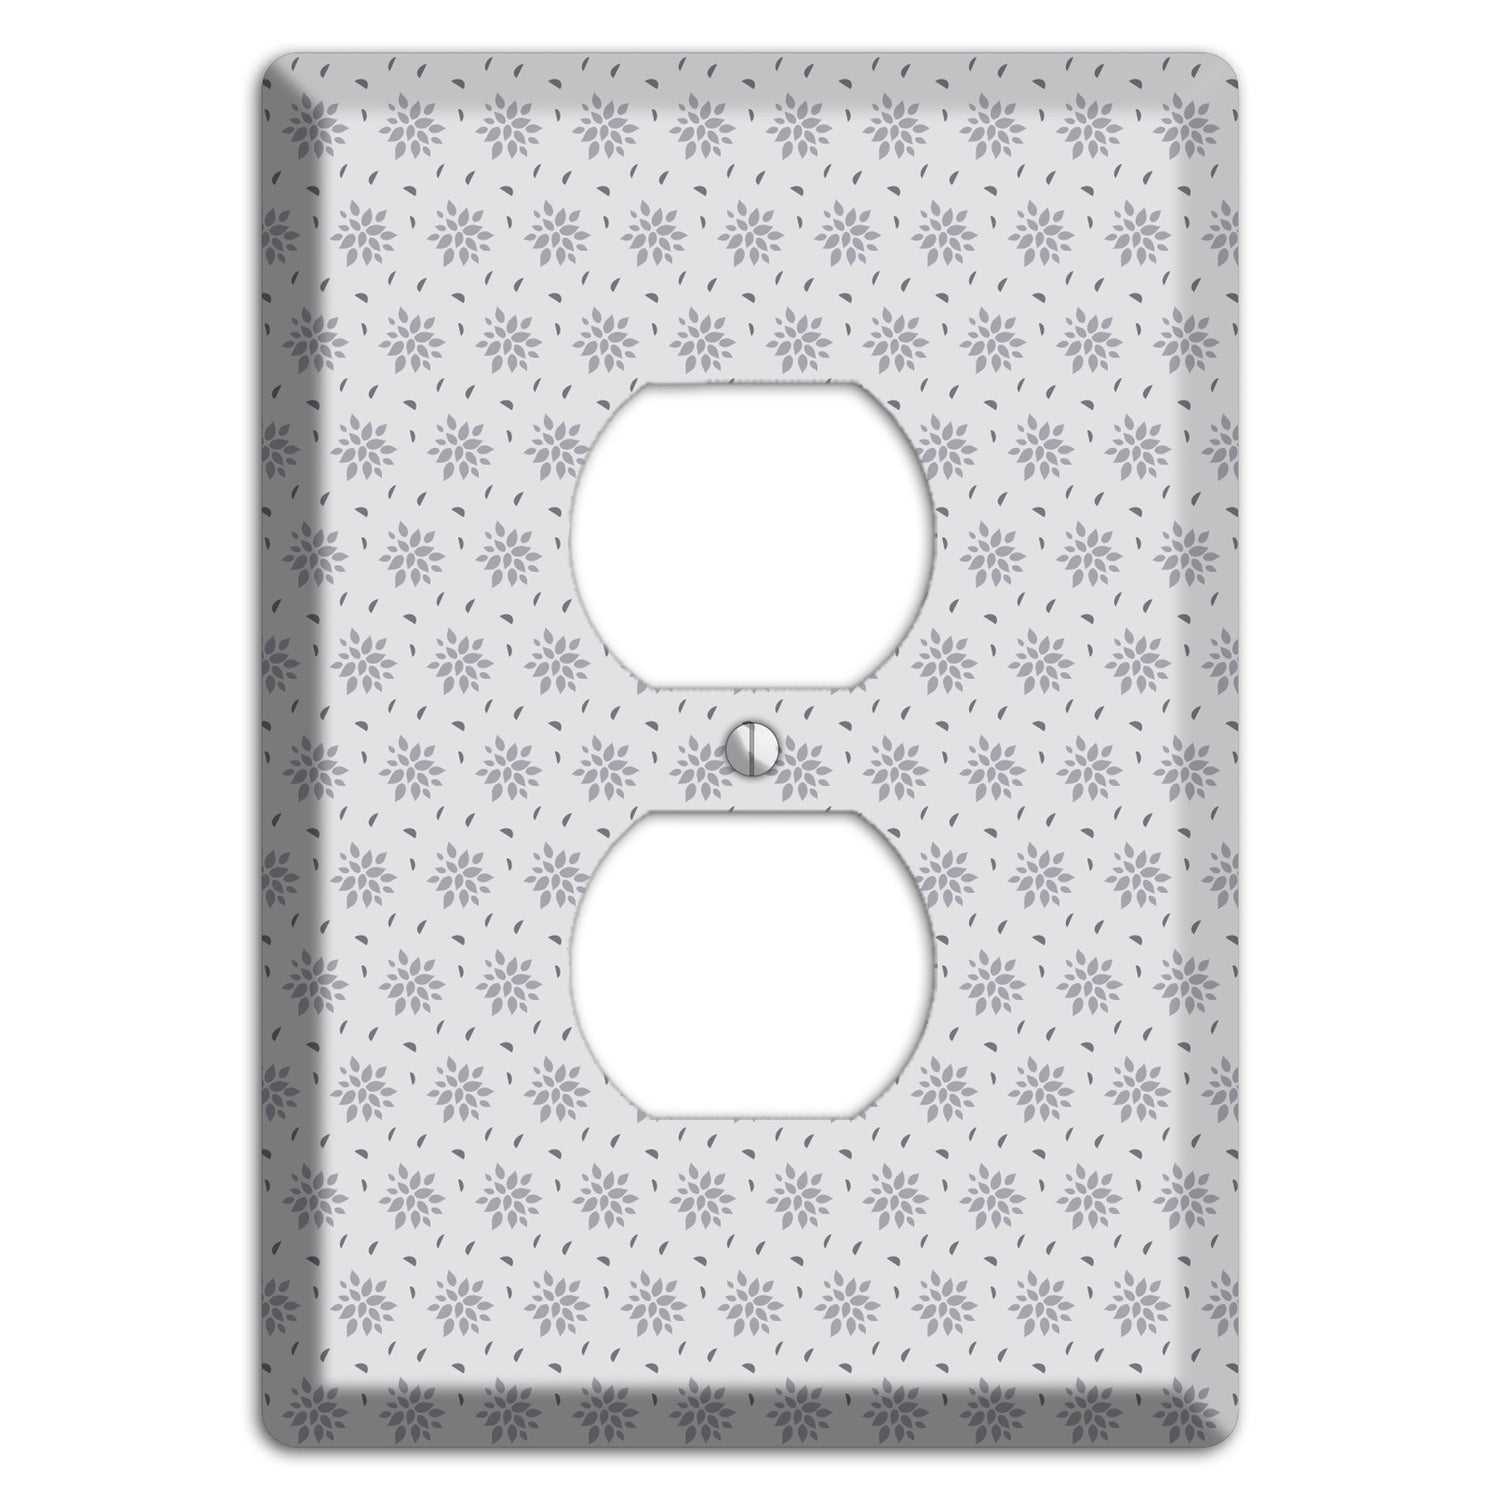 Multi Grey Calico Duplex Outlet Wallplate